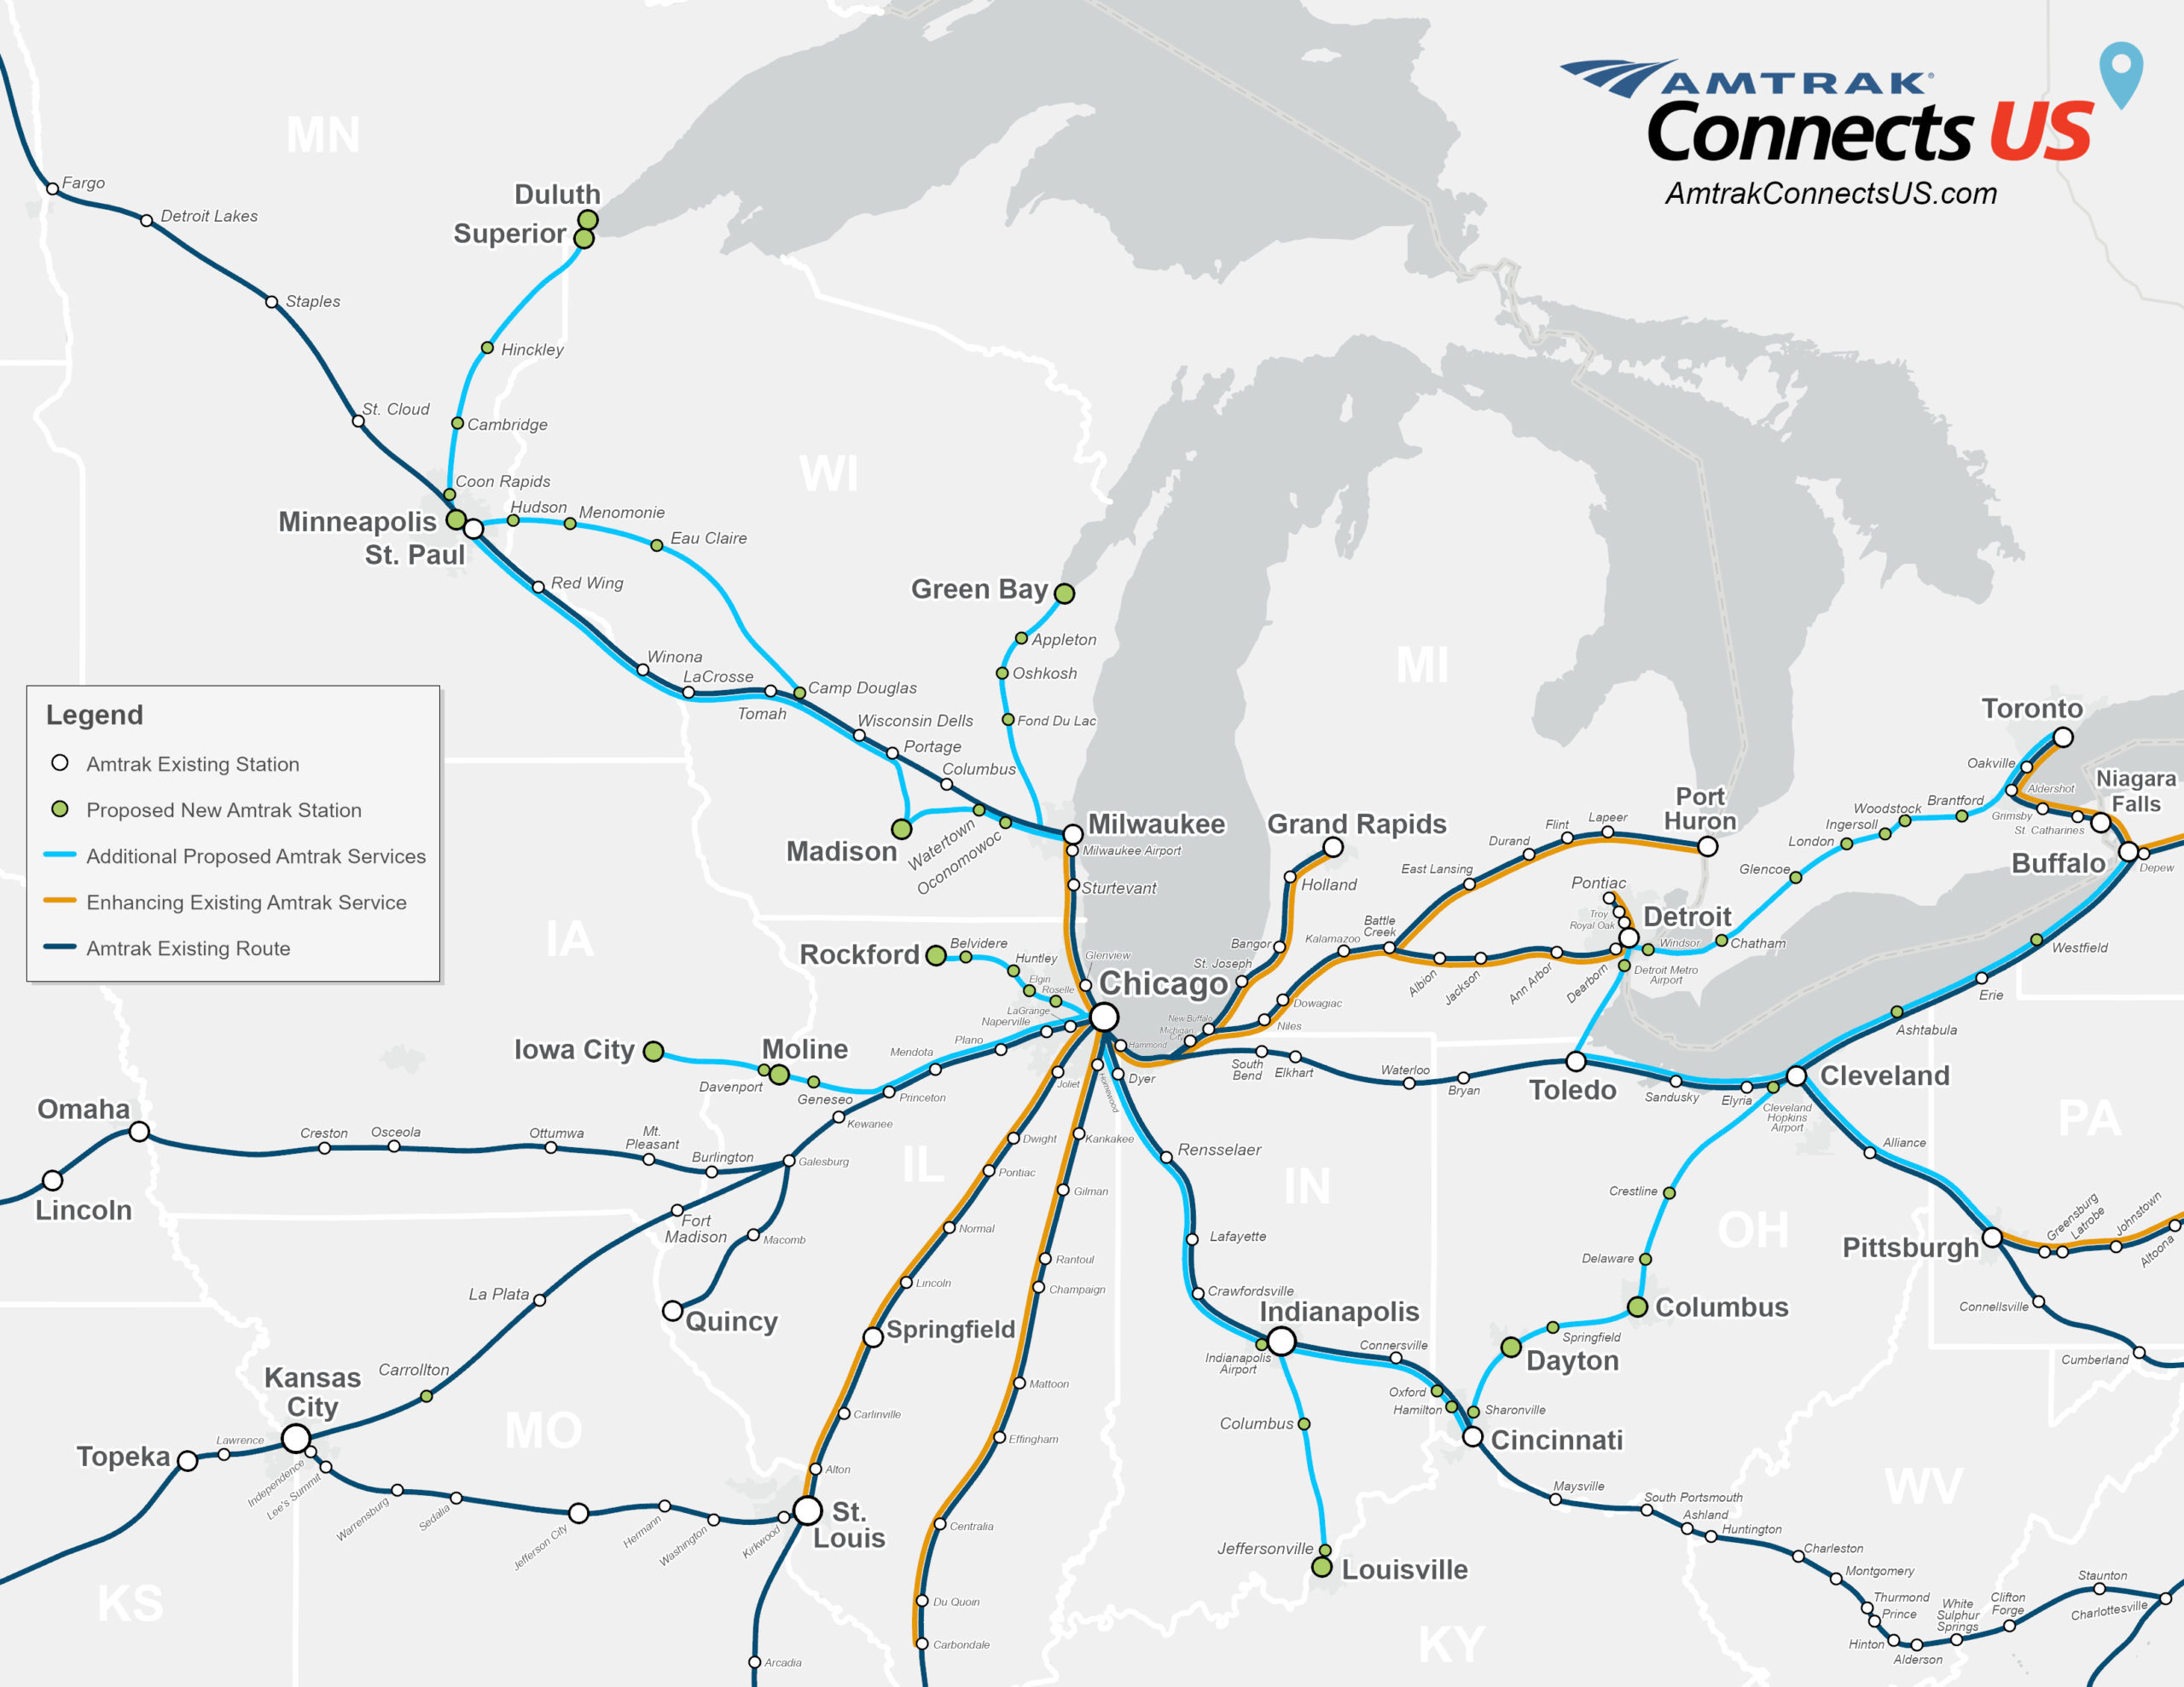 This map details possible Amtrak expansions in the Midwest, including potential connections to Madison and Green Bay